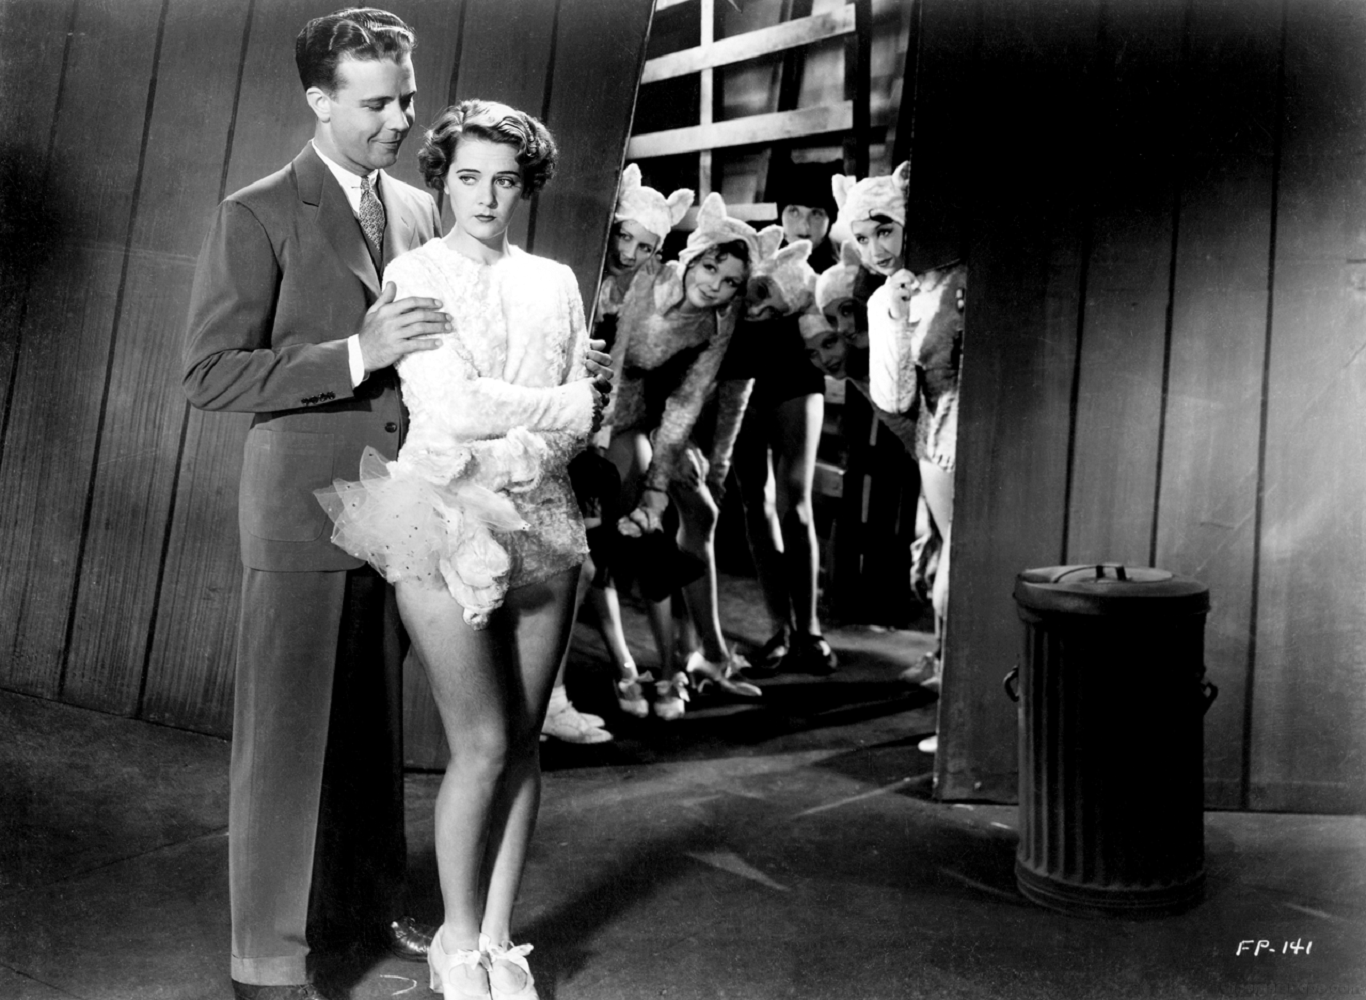 Dick Powell and Ruby Keeler in Footlight parade, 1933